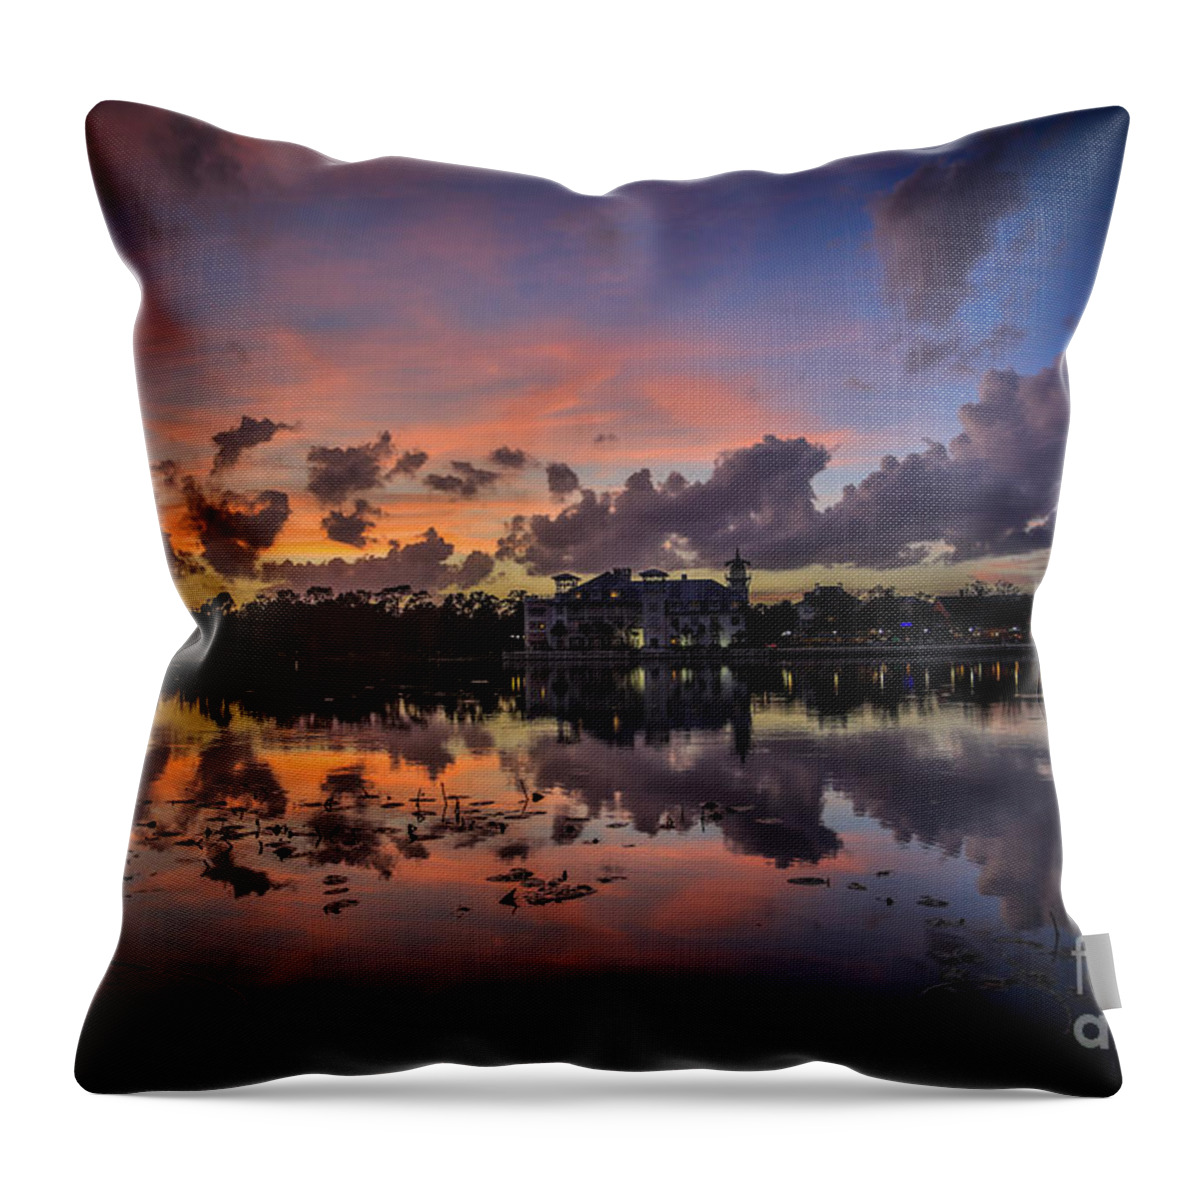 Celebration Throw Pillow featuring the photograph Reflection 8 by Mina Isaac